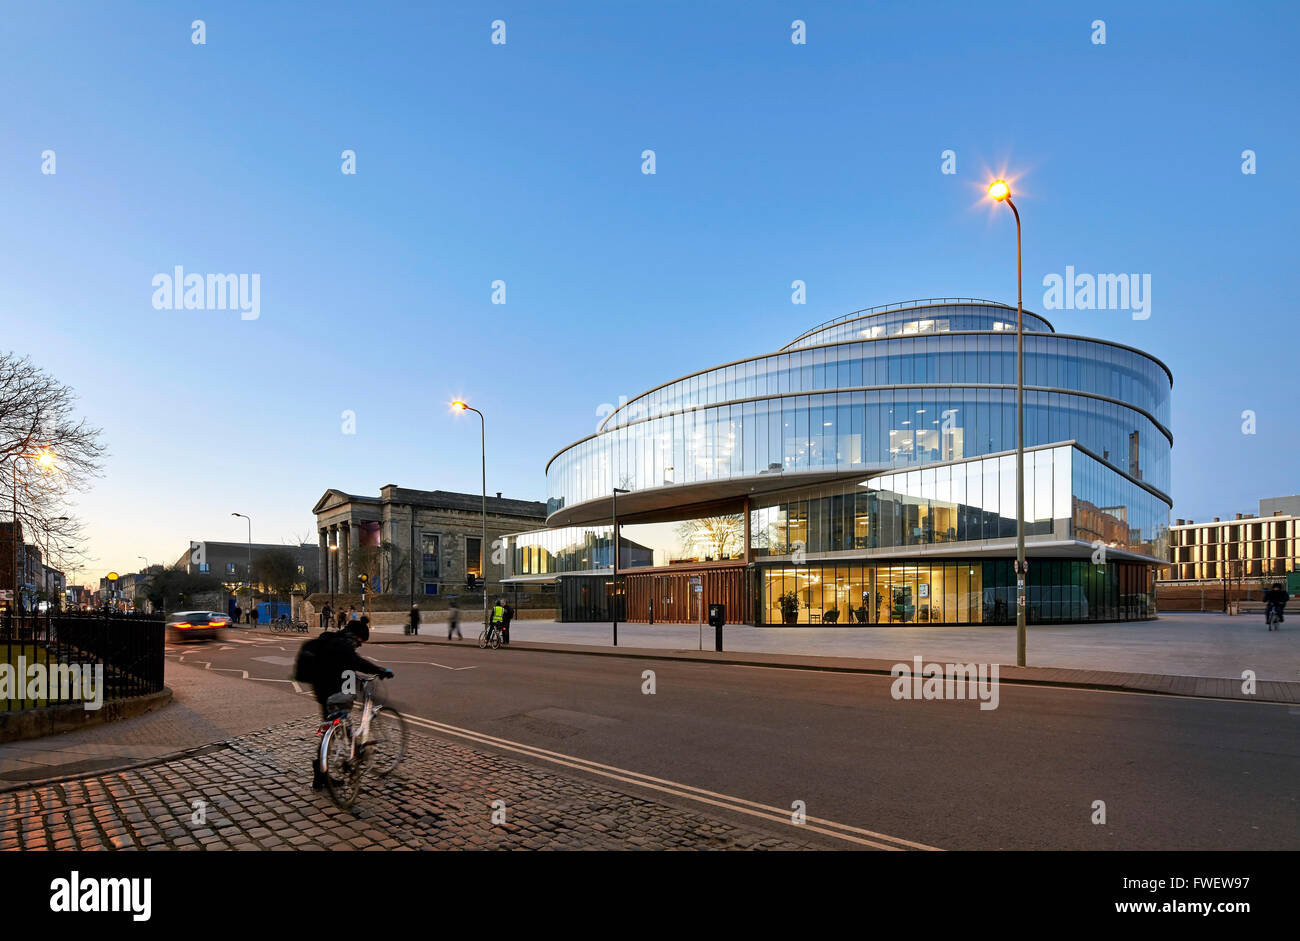 Oblique elevation with street and context at dusk. The Blavatnik School of Government at the University of Oxford, Oxford, Unite Stock Photo